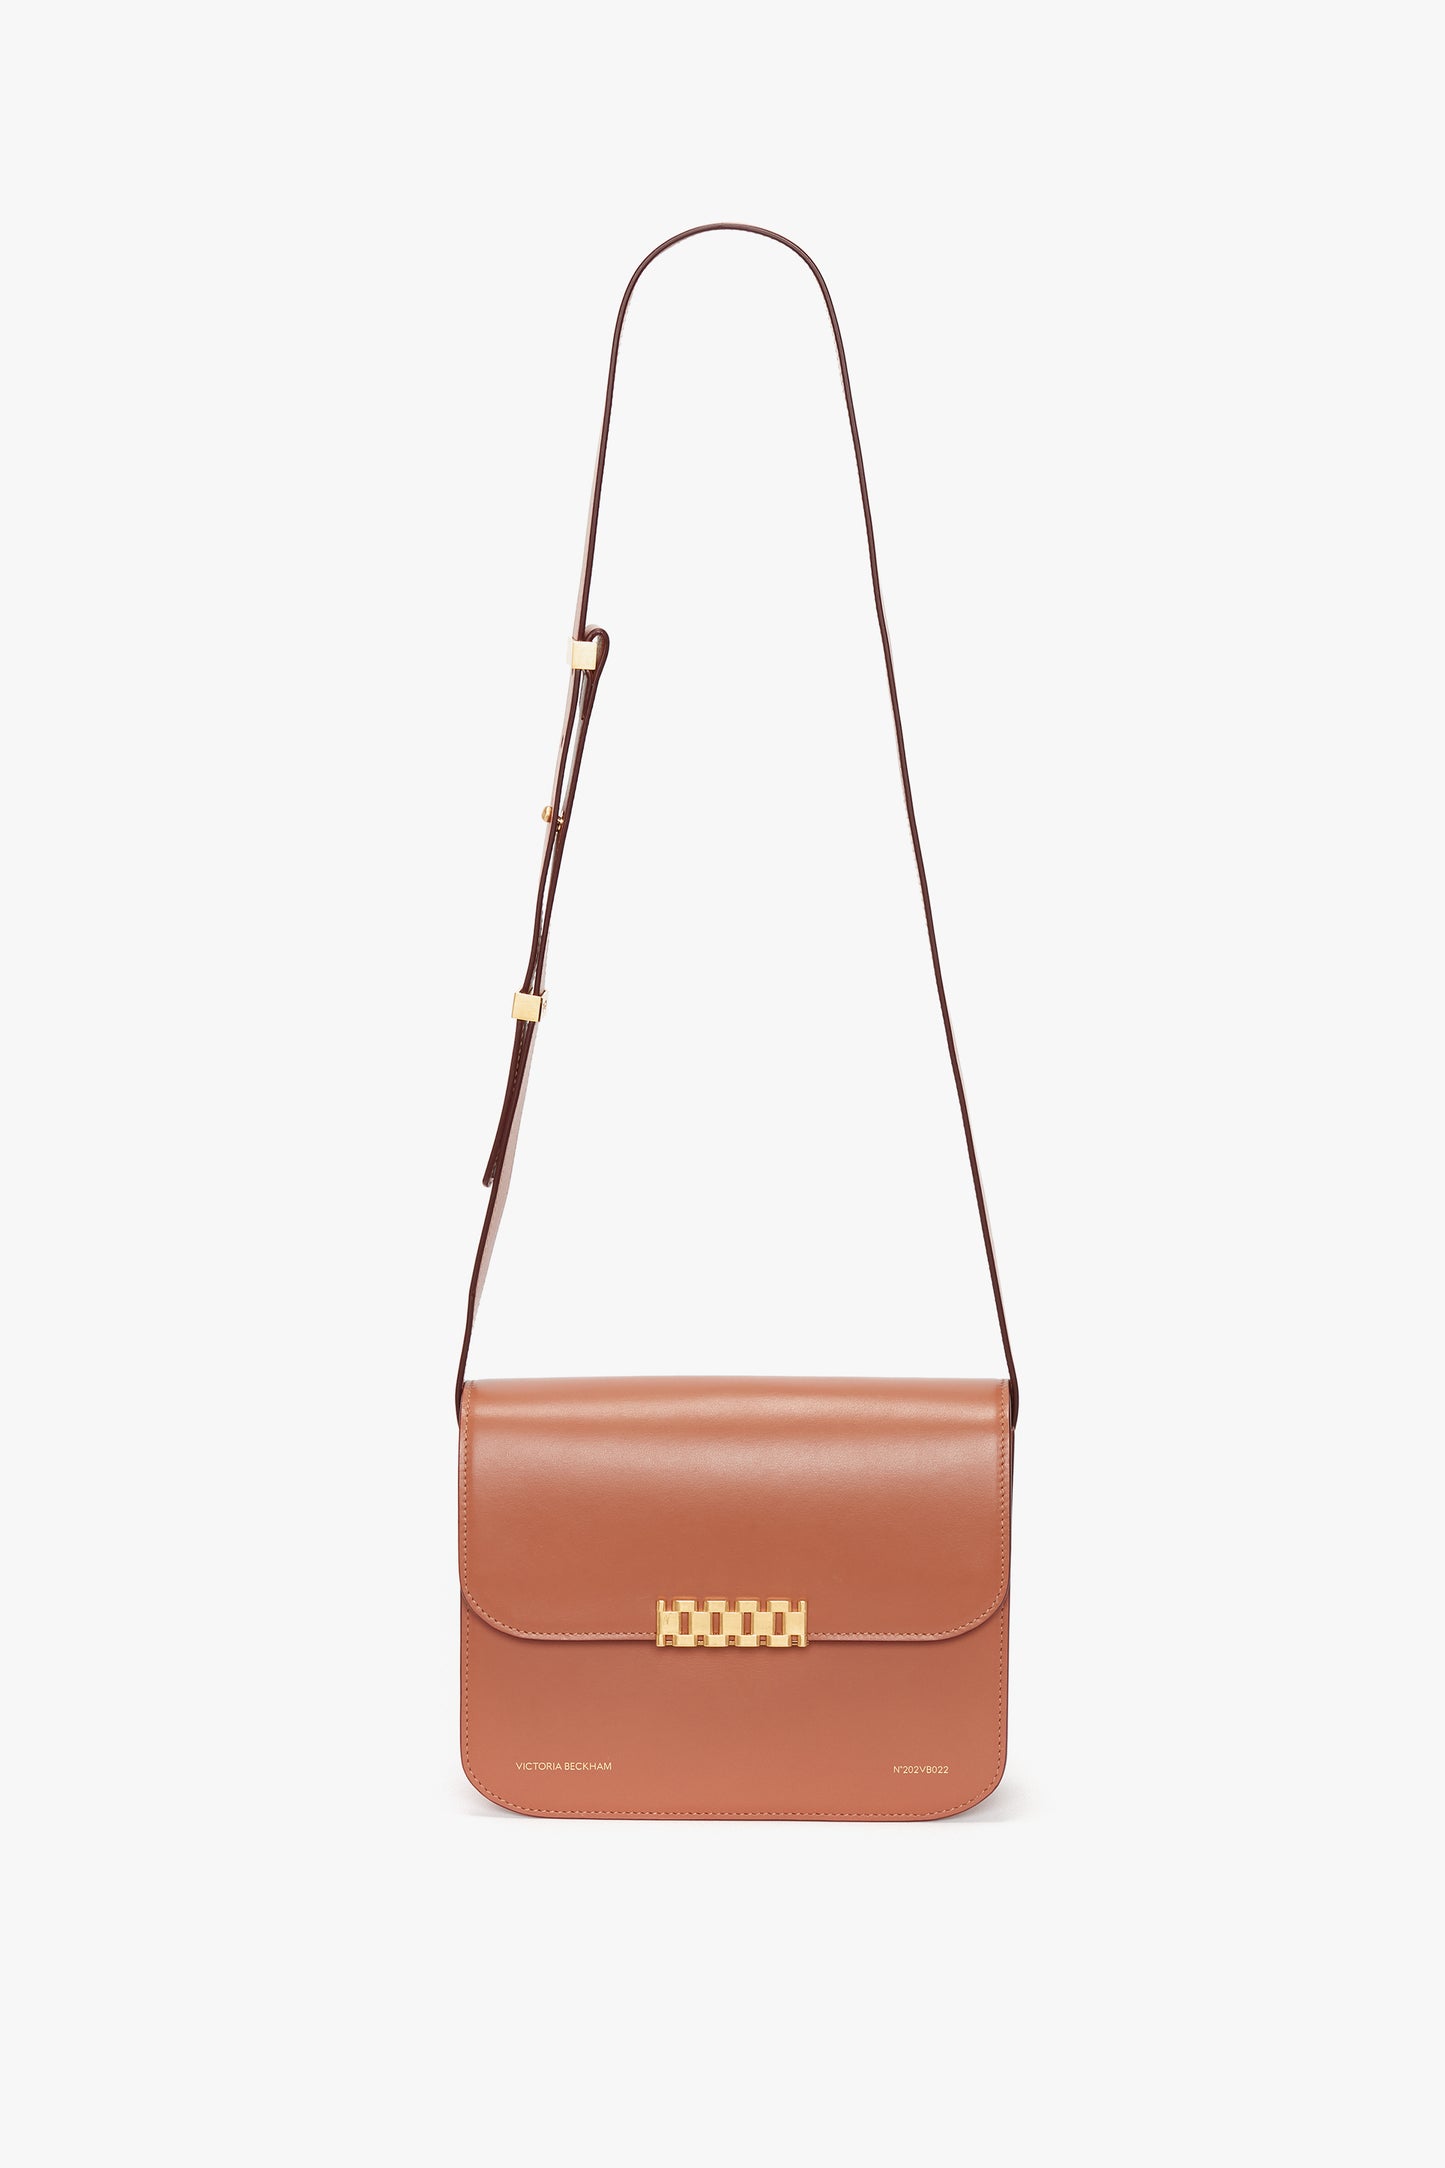 Chain Shoulder Bag In Tan Leather